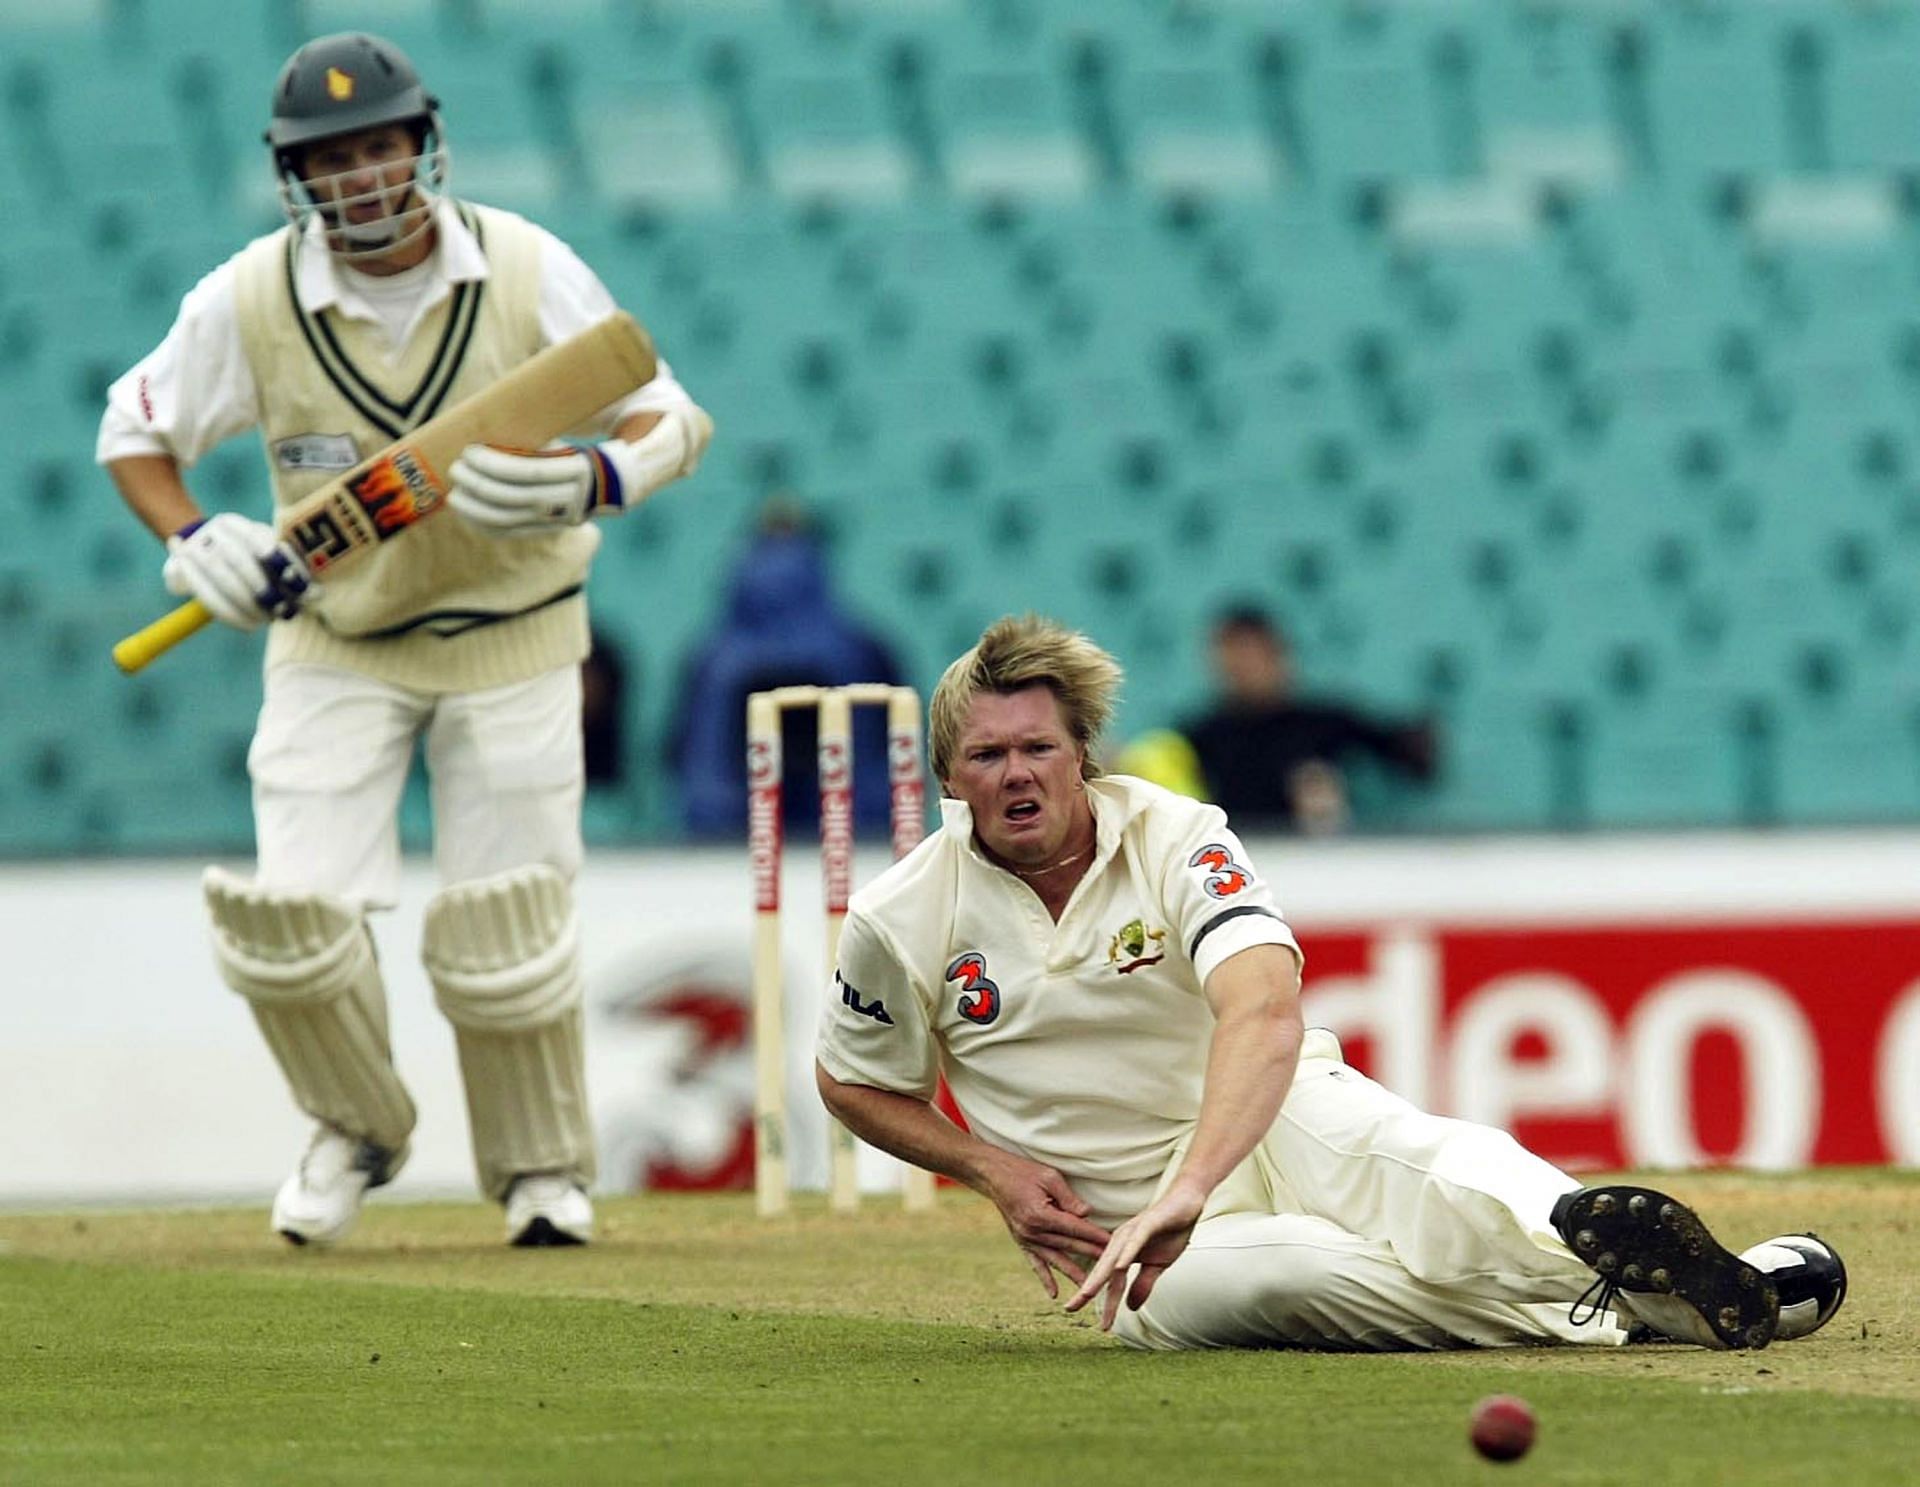 Brad Williams of Australia dives after a drive from Mark Vermeulen of Zimbabwe